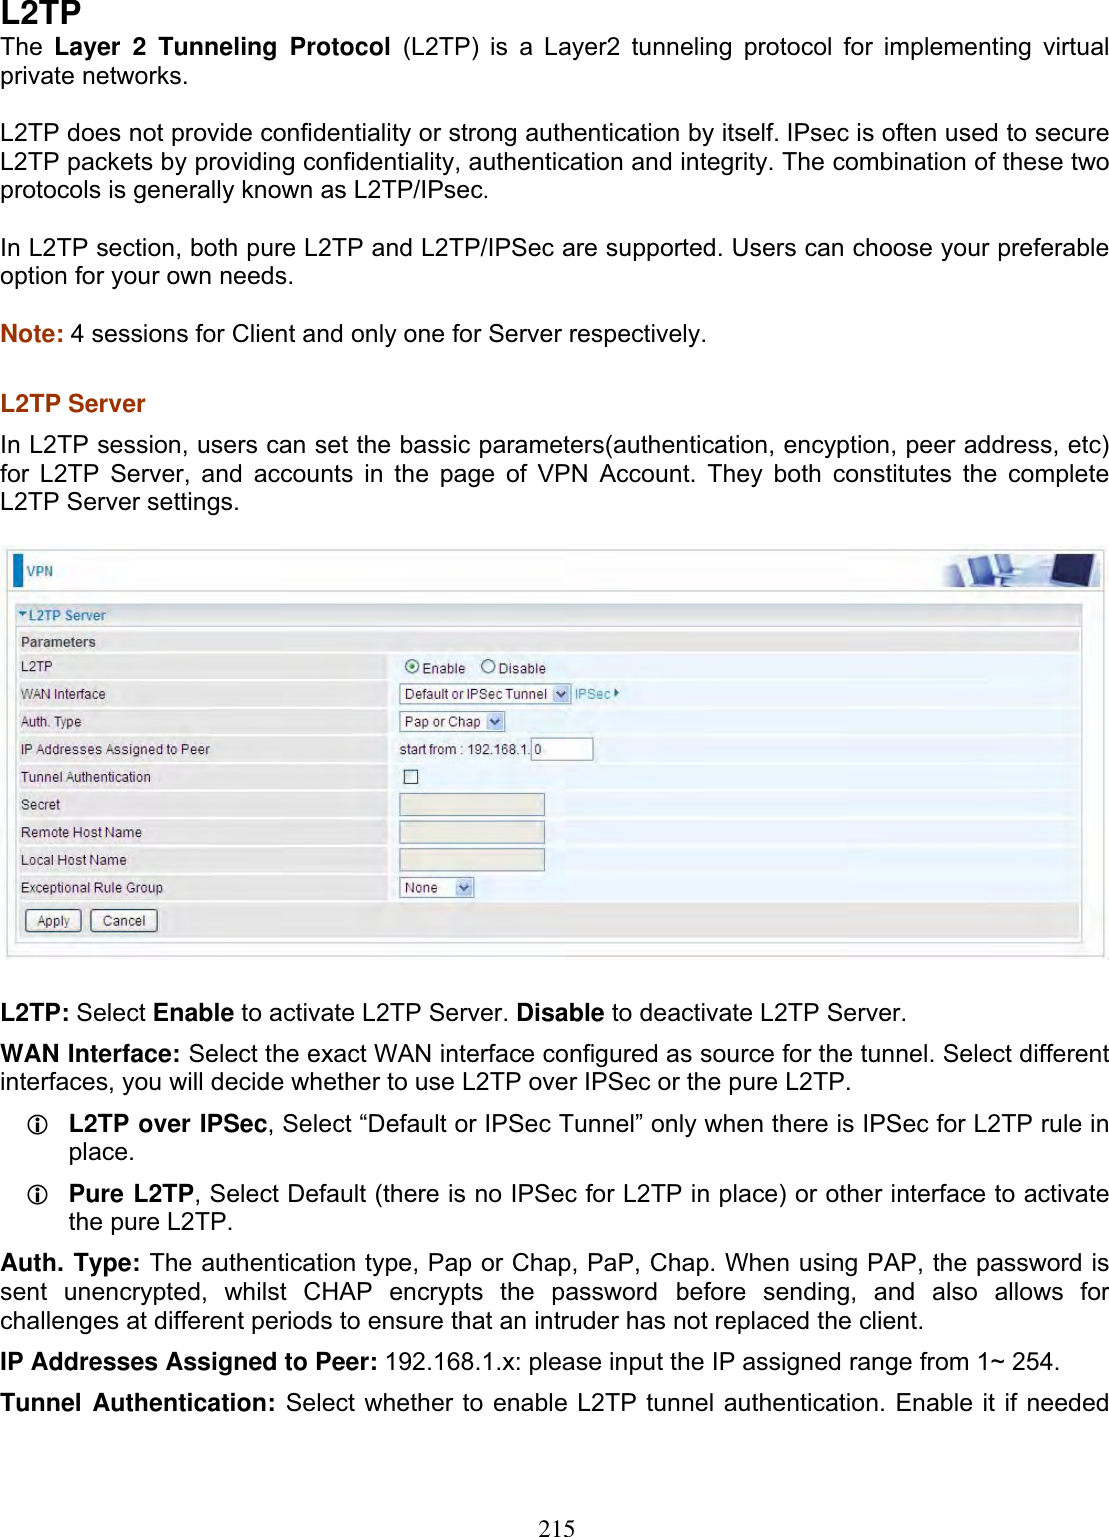 215L2TPThe Layer 2 Tunneling Protocol (L2TP) is a Layer2 tunneling protocol for implementing virtual private networks.L2TP does not provide confidentiality or strong authentication by itself. IPsec is often used to secure L2TP packets by providing confidentiality, authentication and integrity. The combination of these two protocols is generally known as L2TP/IPsec.In L2TP section, both pure L2TP and L2TP/IPSec are supported. Users can choose your preferable option for your own needs. Note: 4 sessions for Client and only one for Server respectively. L2TP ServerIn L2TP session, users can set the bassic parameters(authentication, encyption, peer address, etc) for L2TP Server, and accounts in the page of VPN Account. They both constitutes the complete L2TP Server settings. L2TP: Select Enable to activate L2TP Server. Disable to deactivate L2TP Server. WAN Interface: Select the exact WAN interface configured as source for the tunnel. Select different interfaces, you will decide whether to use L2TP over IPSec or the pure L2TP. LL2TP over IPSec, Select “Default or IPSec Tunnel” only when there is IPSec for L2TP rule in place.LPure L2TP, Select Default (there is no IPSec for L2TP in place) or other interface to activate the pure L2TP.Auth. Type: The authentication type, Pap or Chap, PaP, Chap. When using PAP, the password is sent unencrypted, whilst CHAP encrypts the password before sending, and also allows for challenges at different periods to ensure that an intruder has not replaced the client. IP Addresses Assigned to Peer: 192.168.1.x: please input the IP assigned range from 1~ 254.Tunnel Authentication: Select whether to enable L2TP tunnel authentication. Enable it if needed 